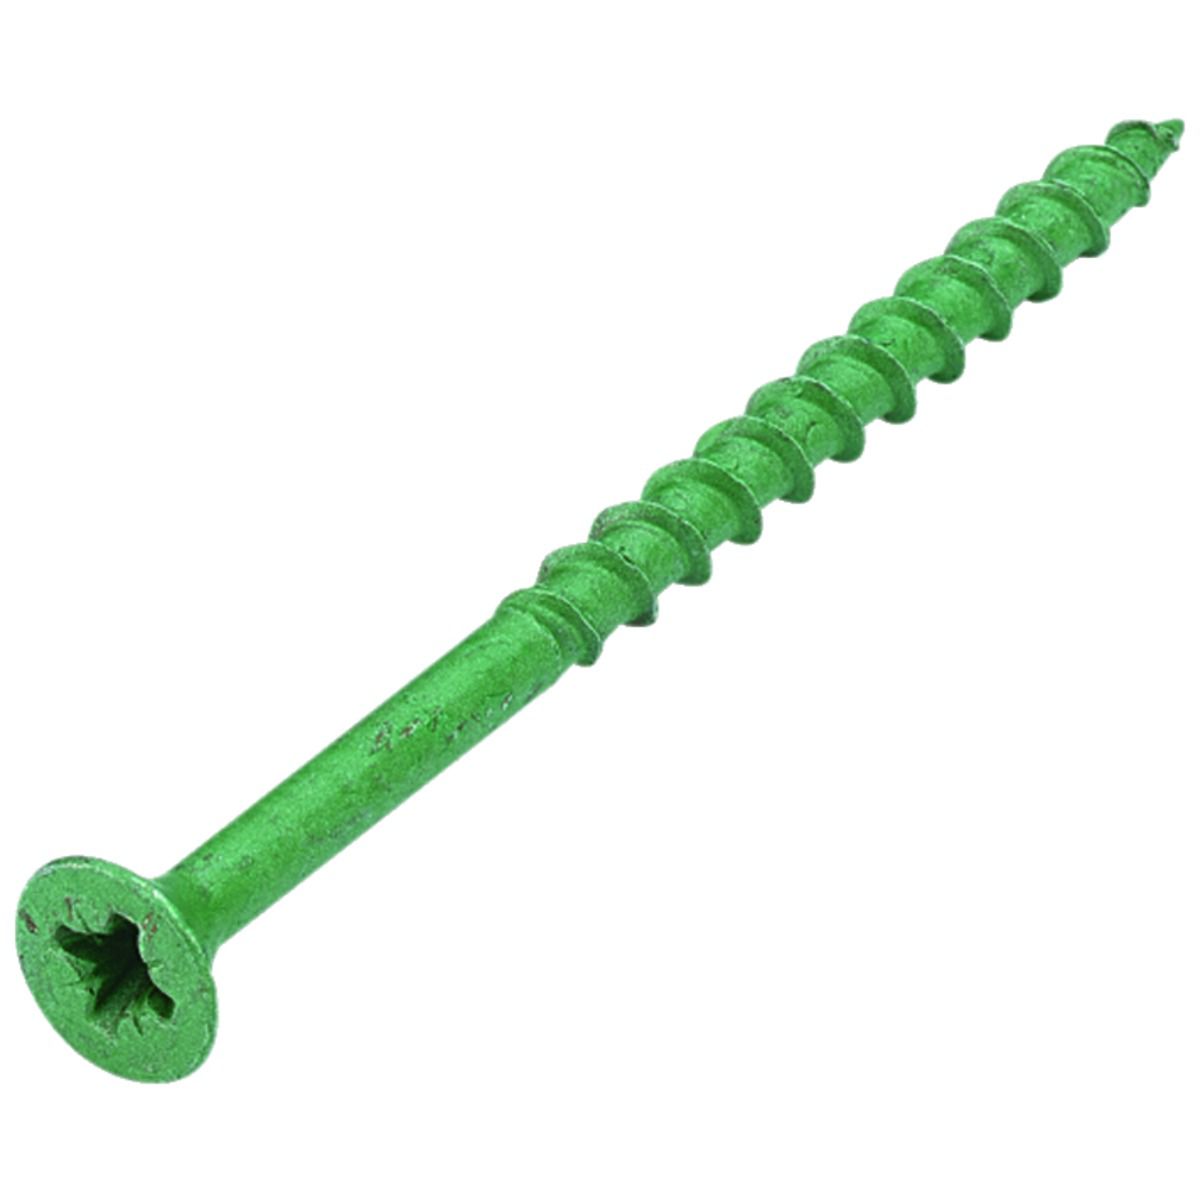 Image of Wickes External Grade Screws - Green No 10 x 76mm Pack of 20